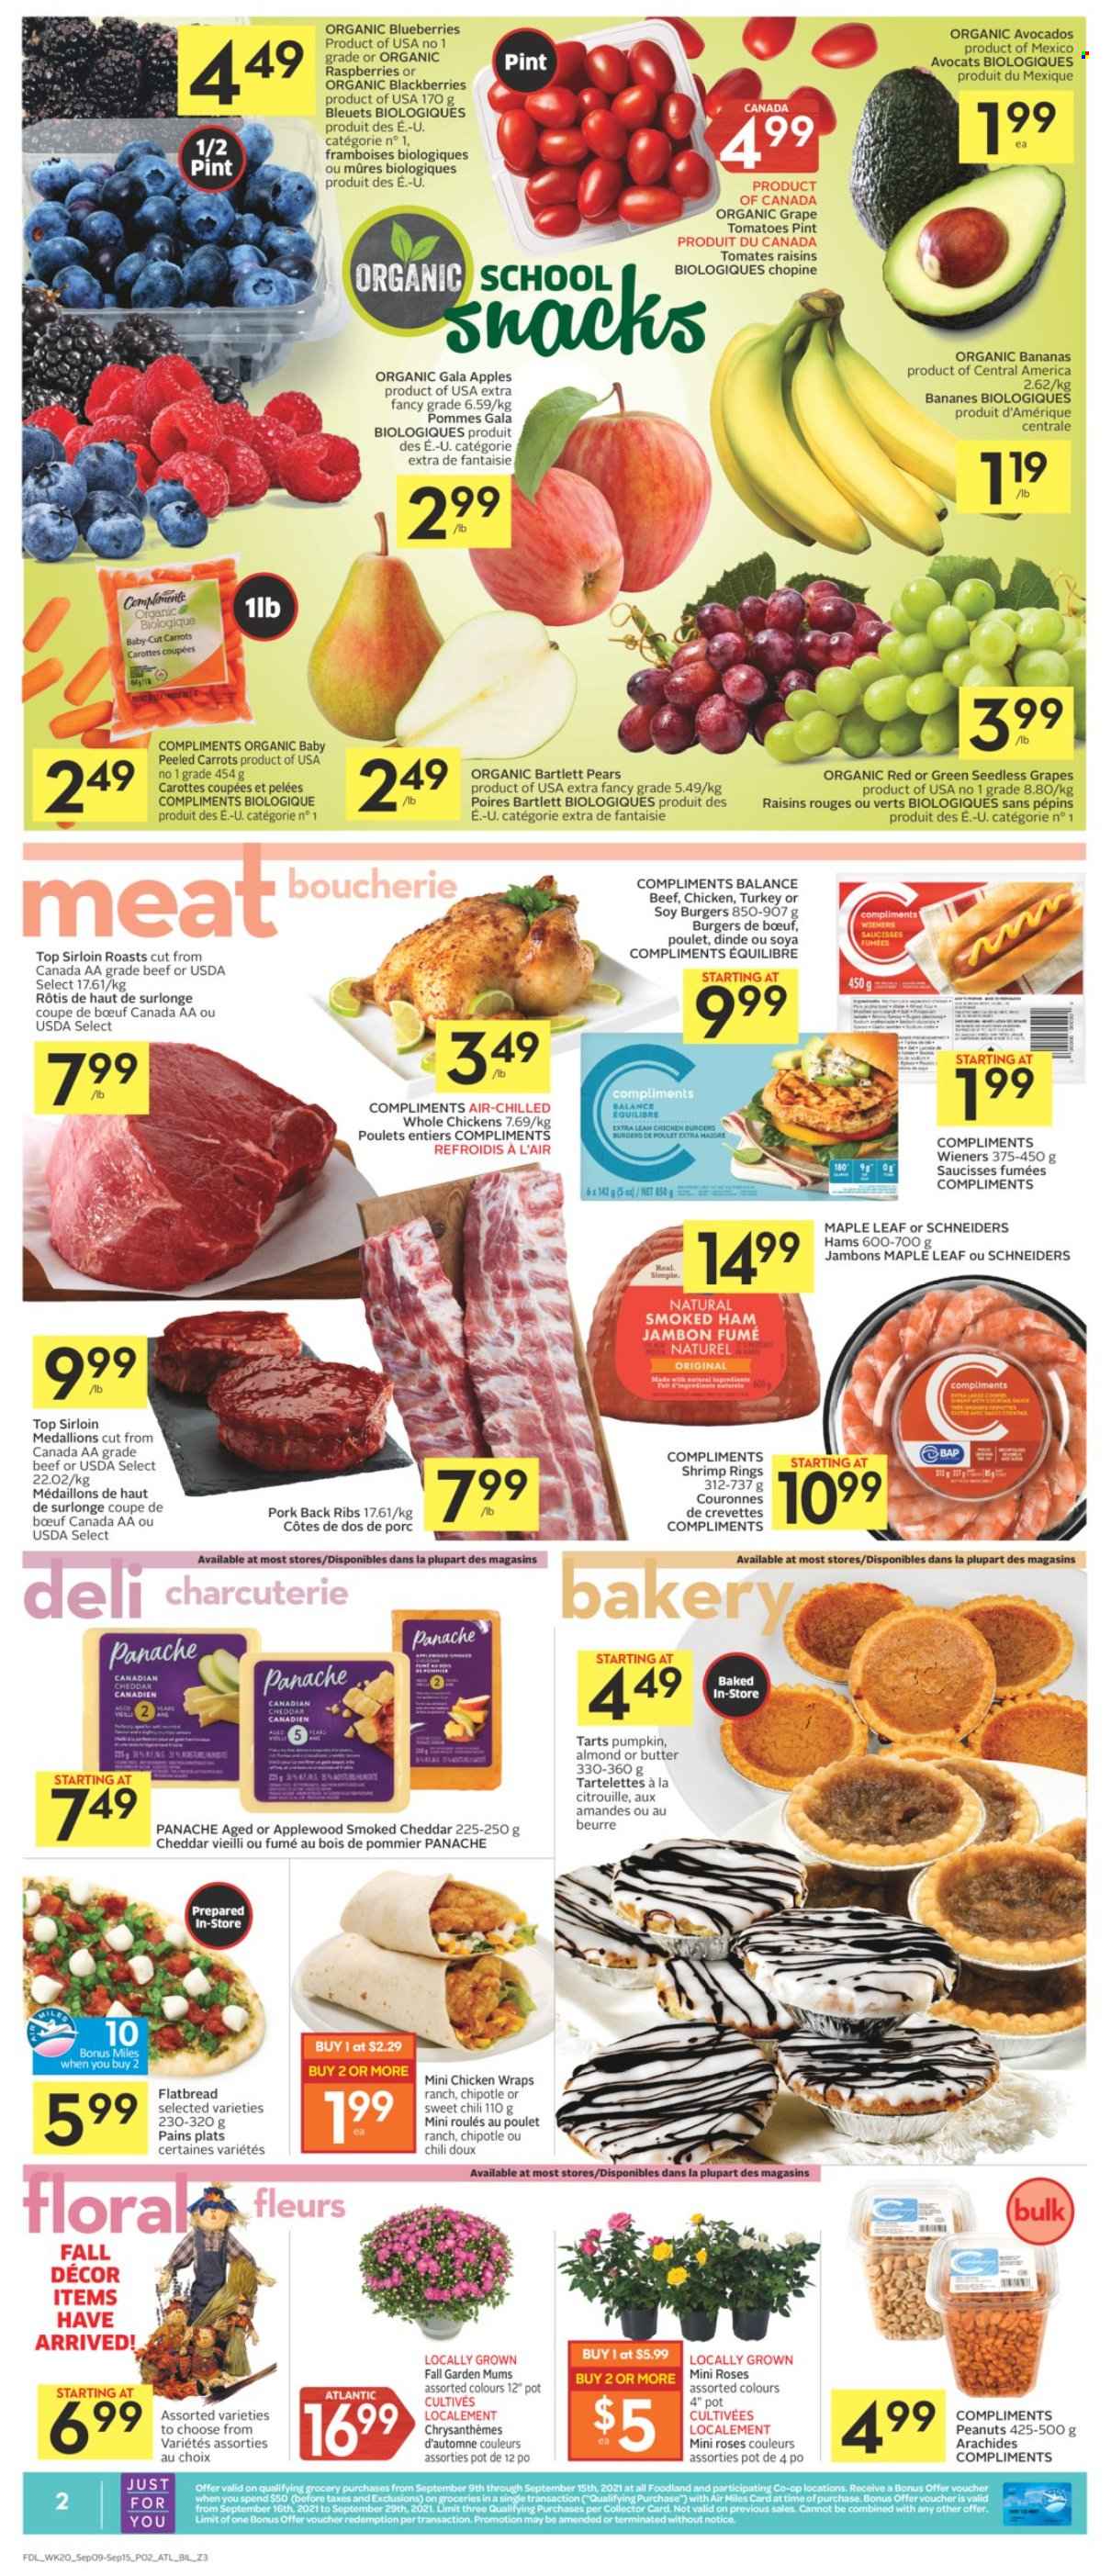 thumbnail - Co-op Flyer - September 09, 2021 - September 15, 2021 - Sales products - flatbread, wraps, tomatoes, apples, avocado, bananas, Bartlett pears, blackberries, Gala, seedless grapes, pears, organic bananas, shrimps, hamburger, ham, smoked ham, cheddar, cheese, butter, peanuts, dried fruit, whole chicken, pork meat, pork ribs, pork back ribs, raisins. Page 2.